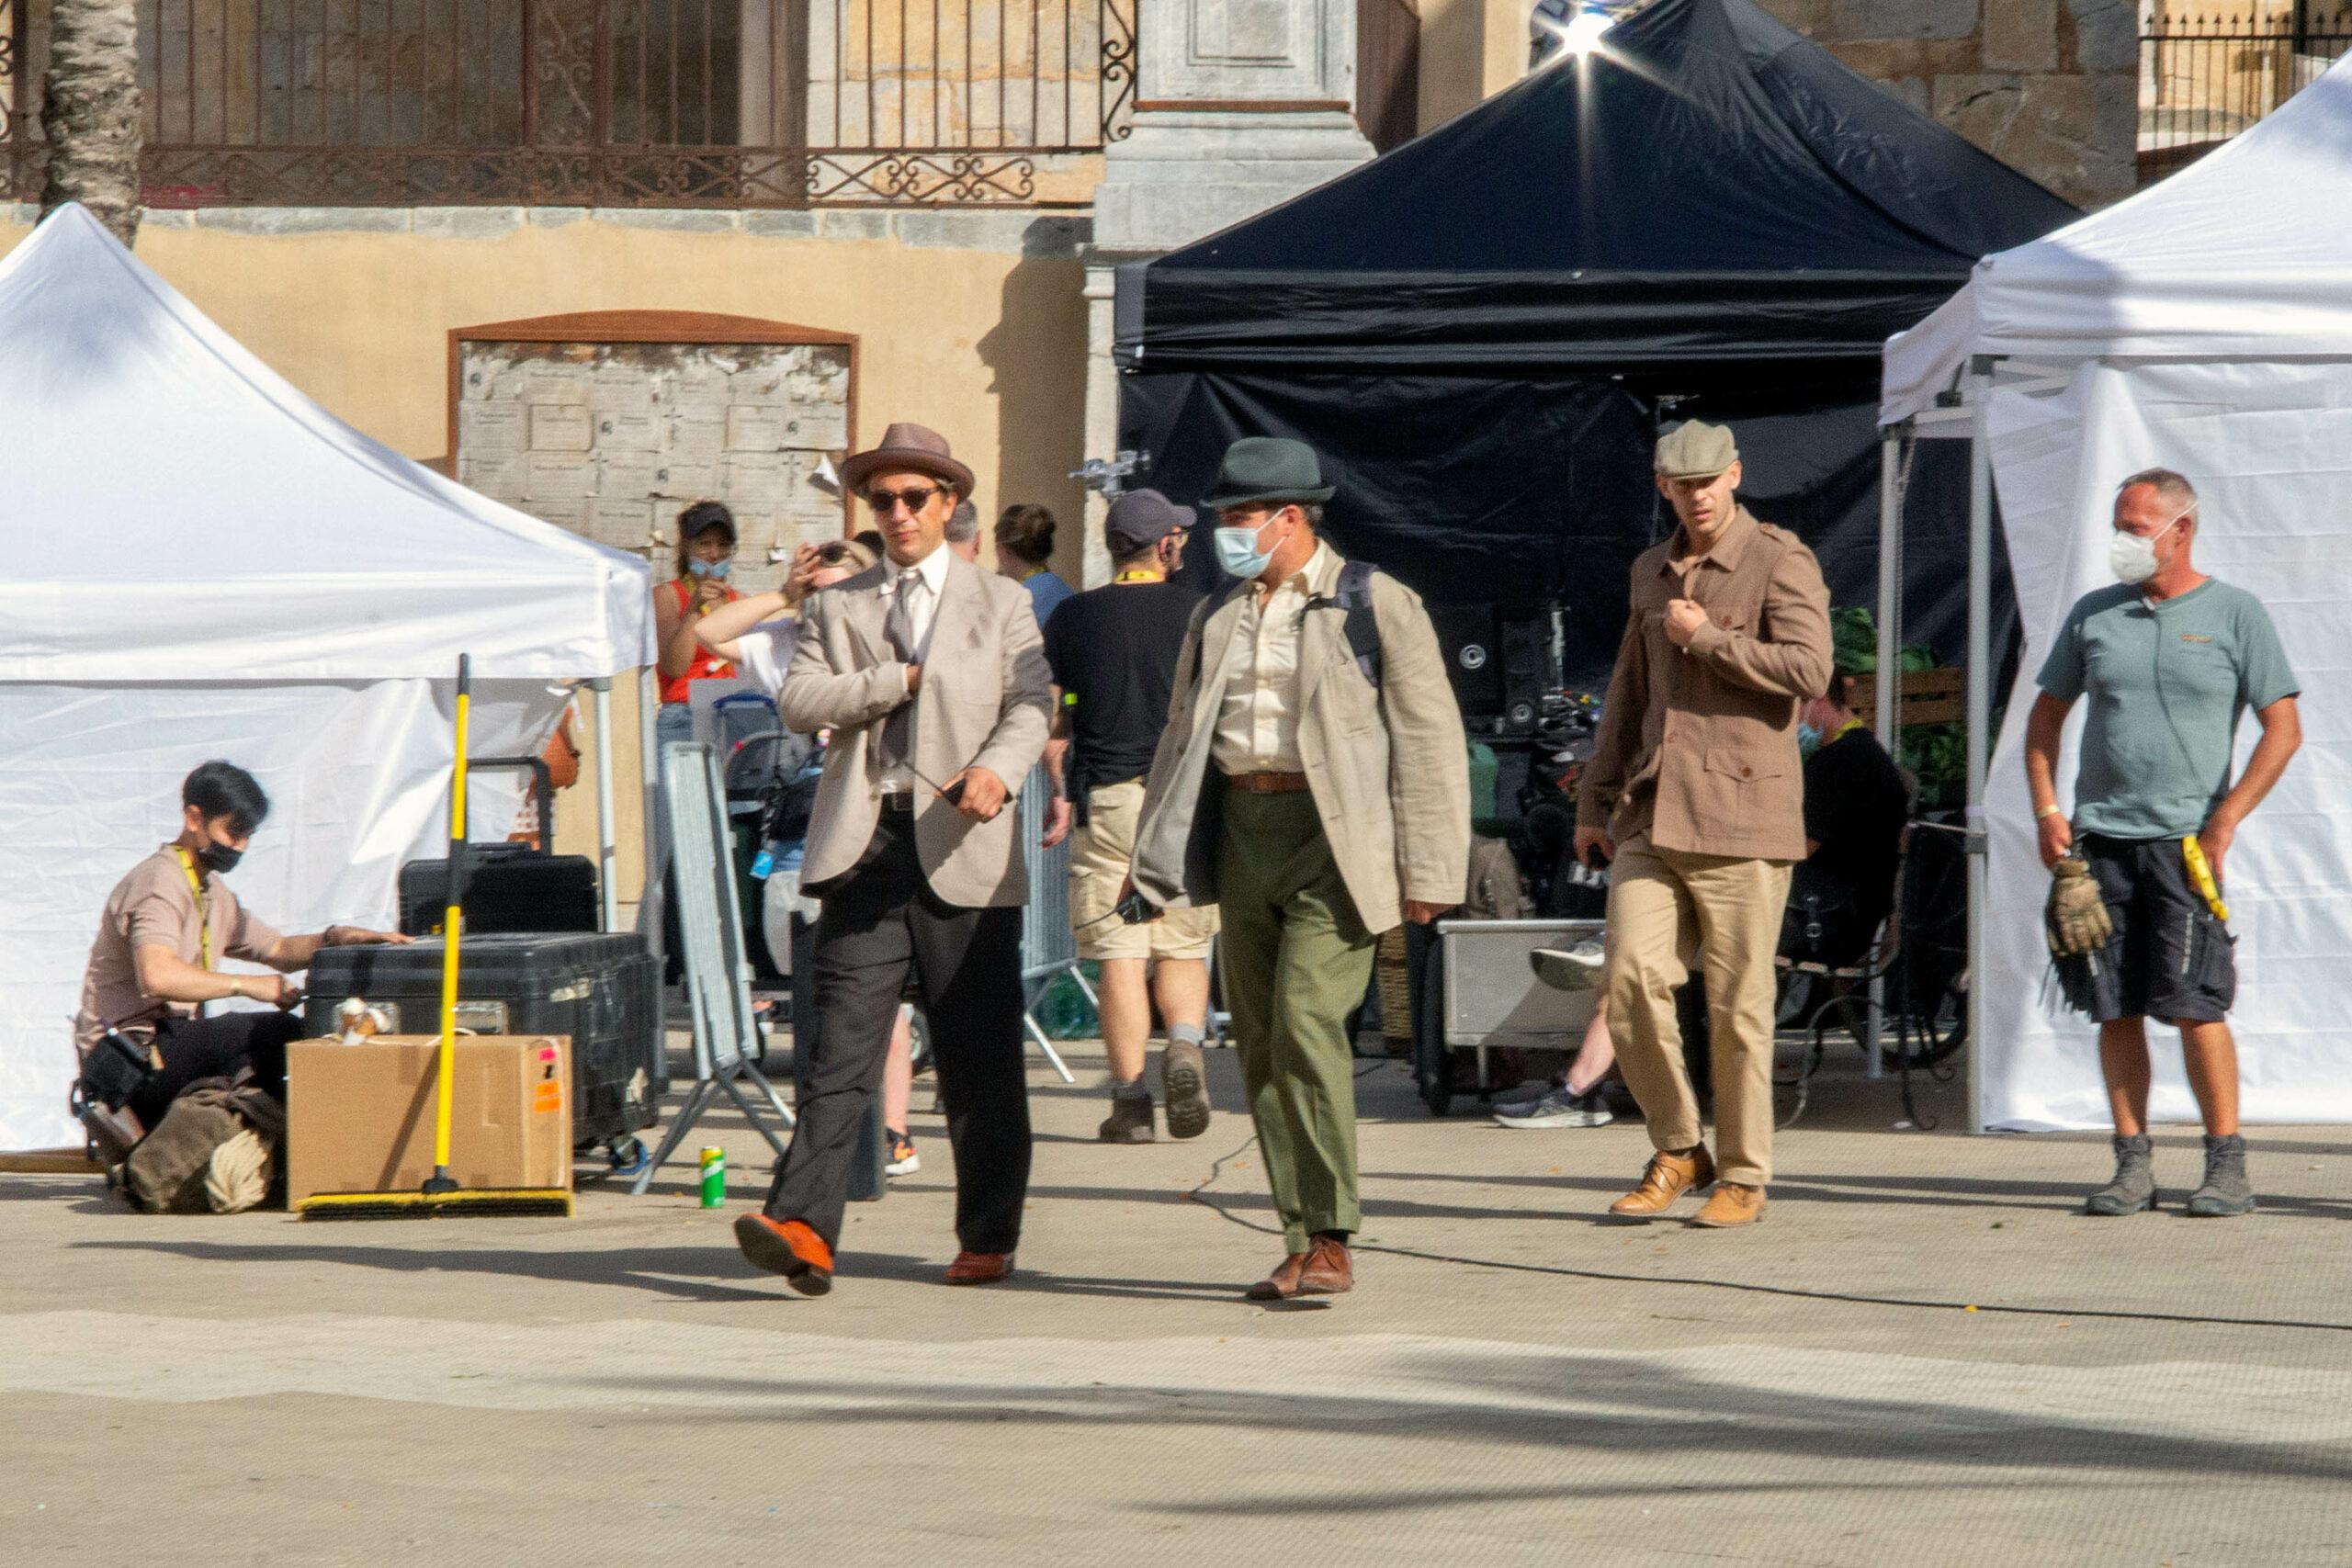 Harrison Ford and Phoebe Waller-Bridge filming Indiana Jones 5 in Cefalù, Sicily